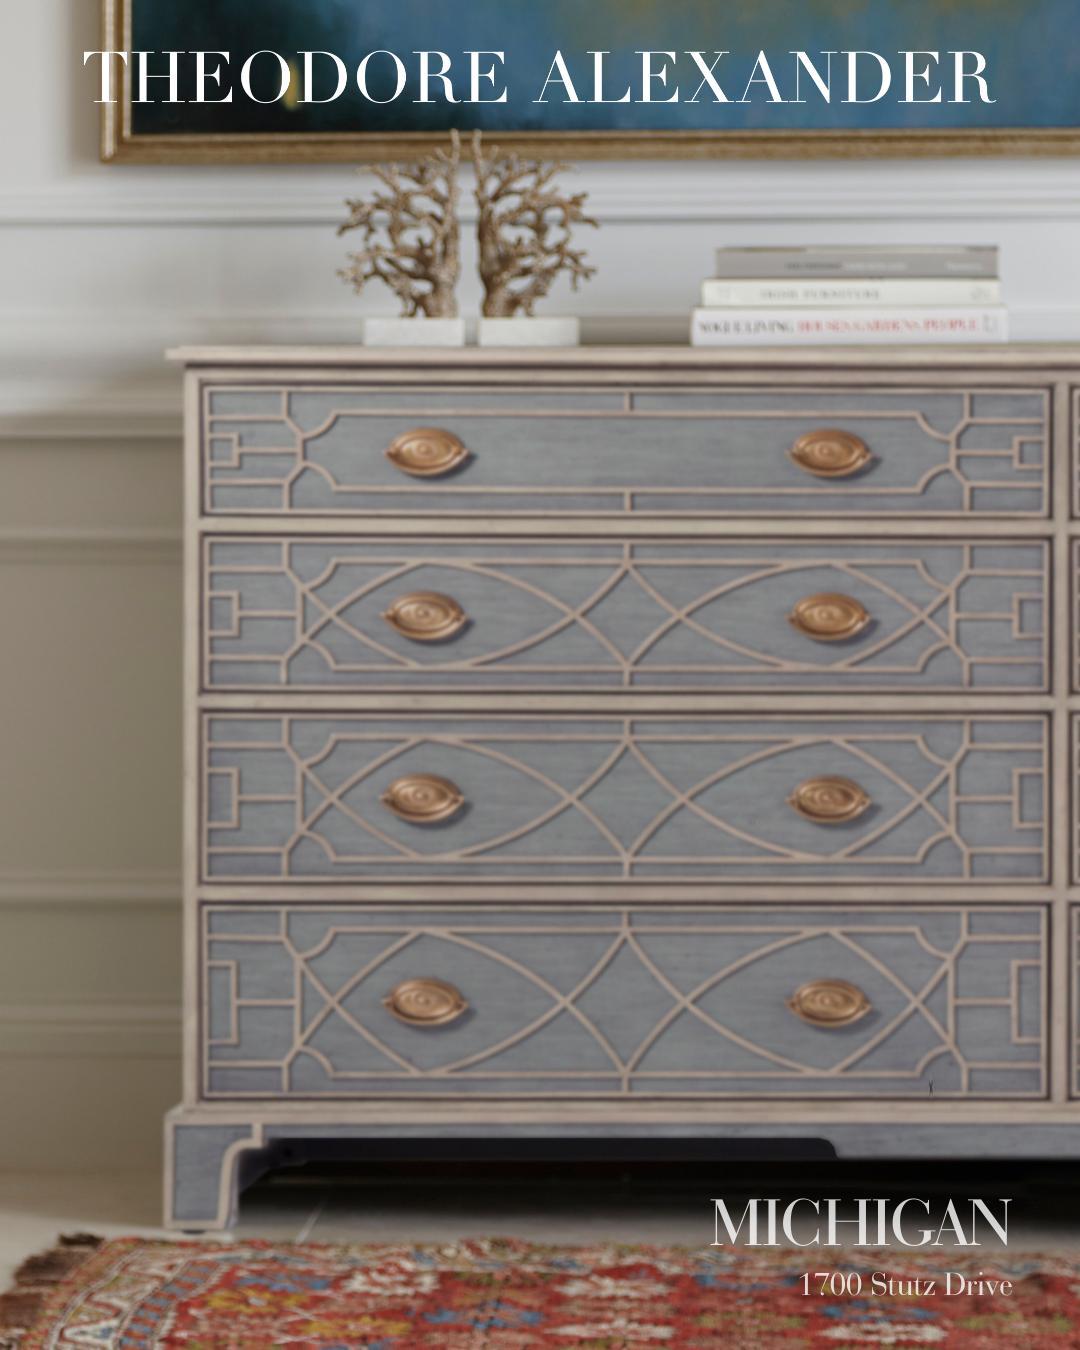 Shop our Michigan showroom today to disc...